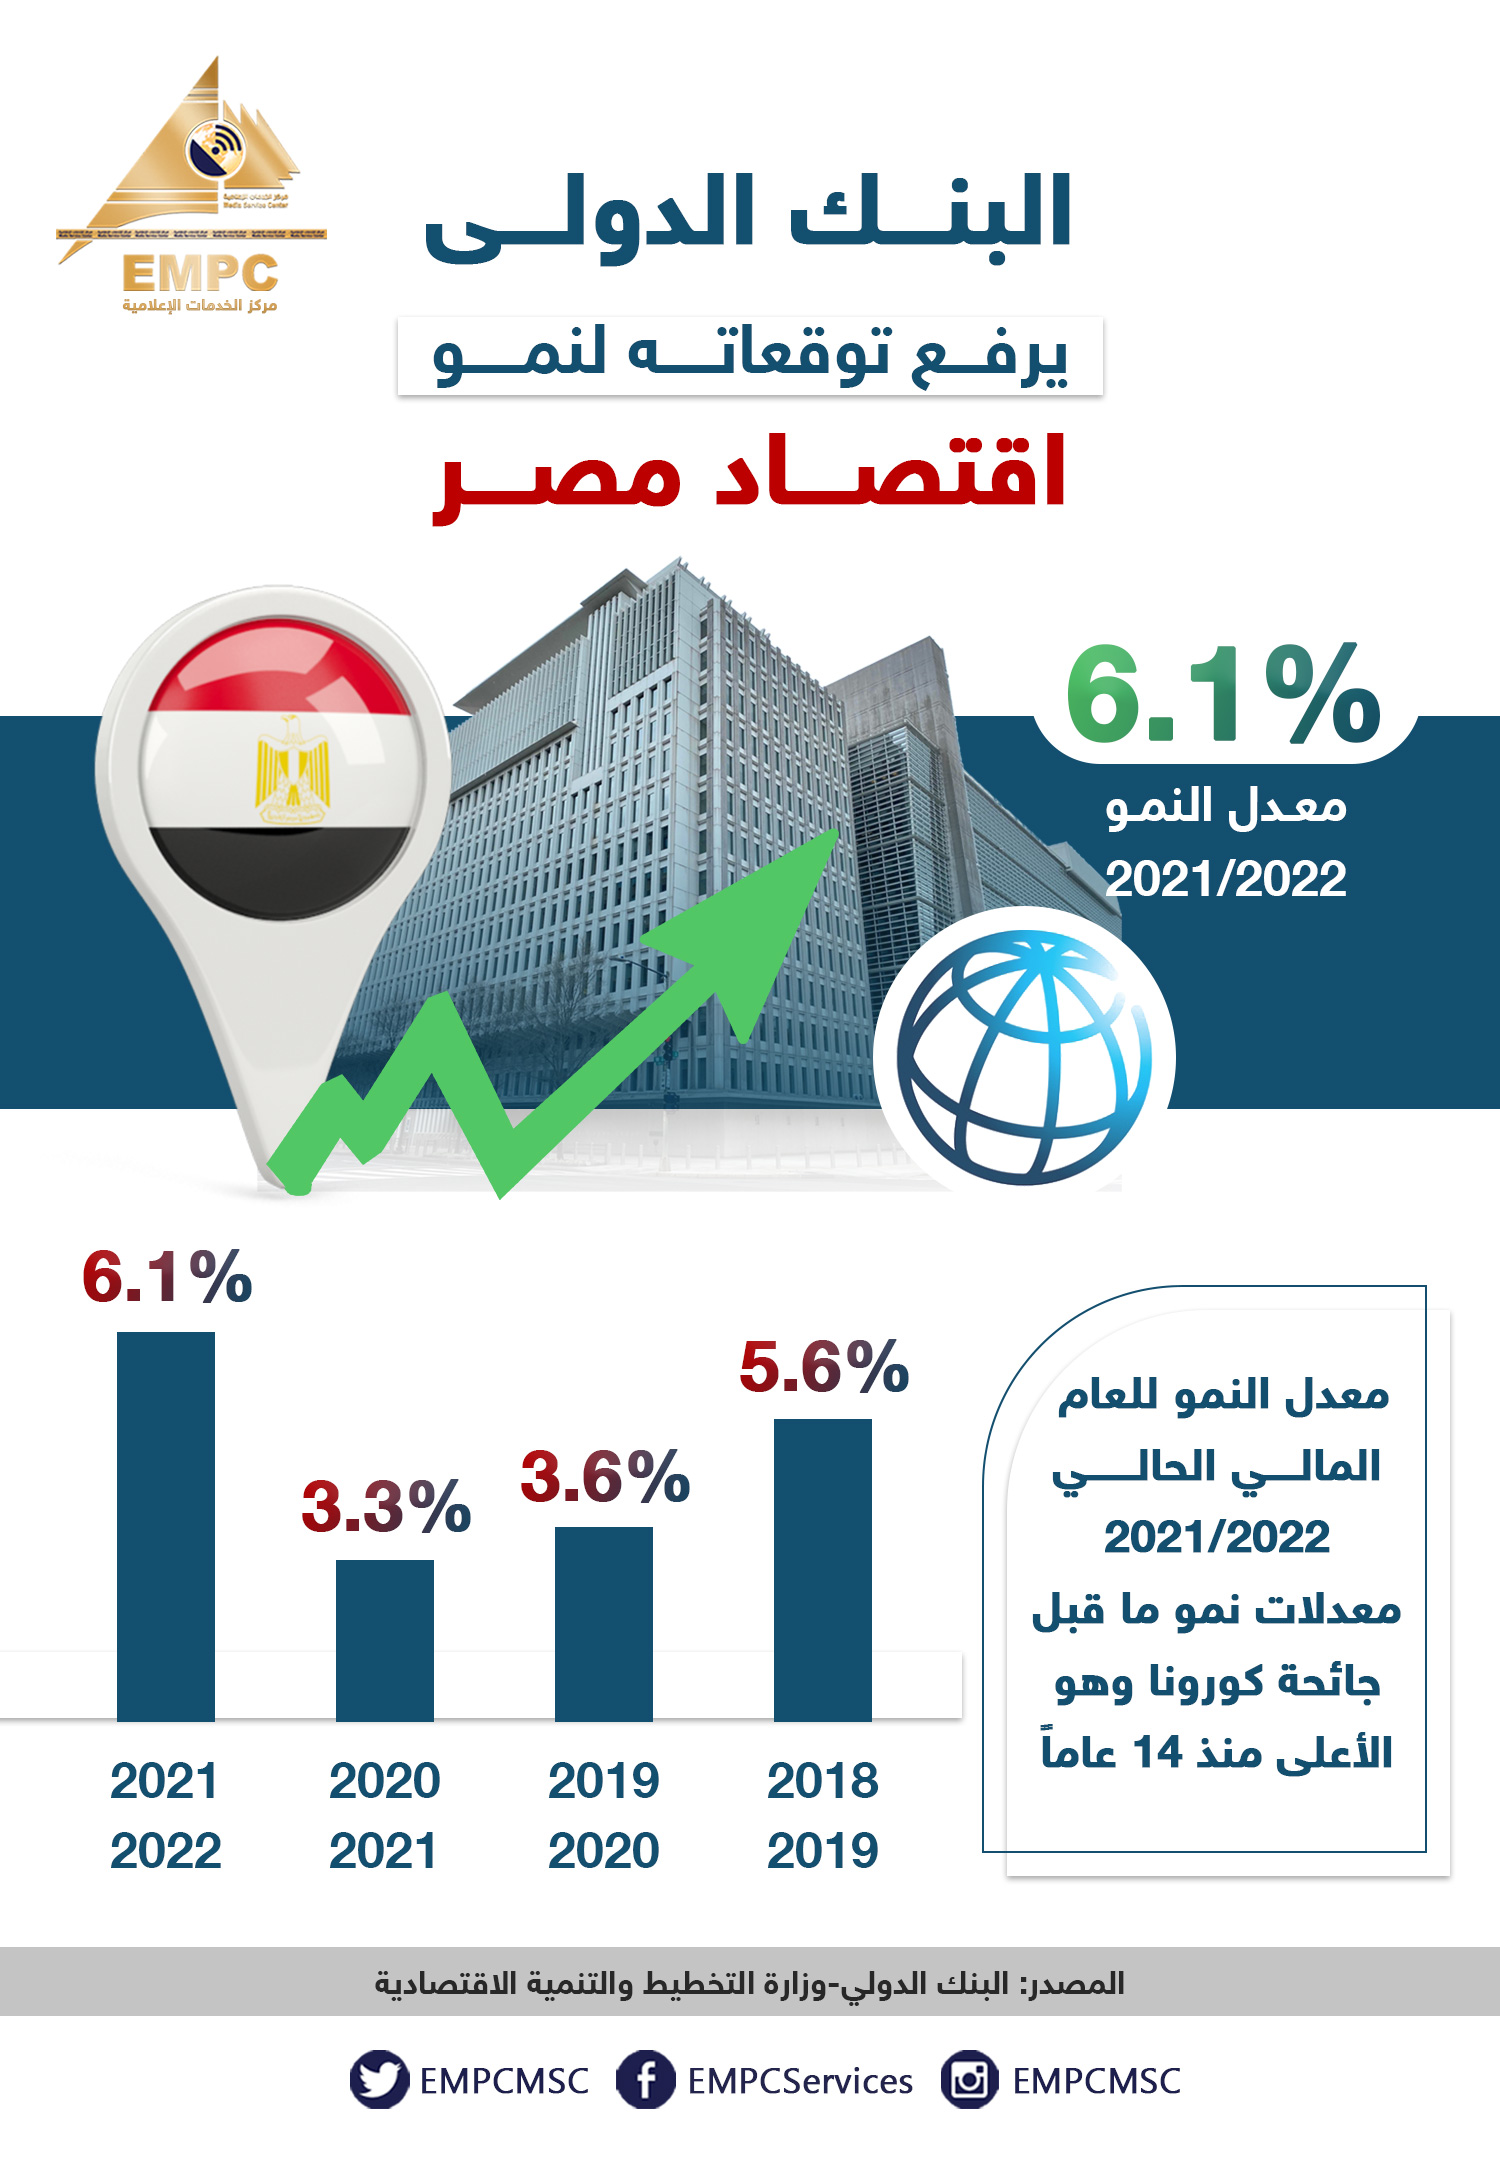  the World Bank raises its expectations for the growth of Egypt's economy to exceed before Corona